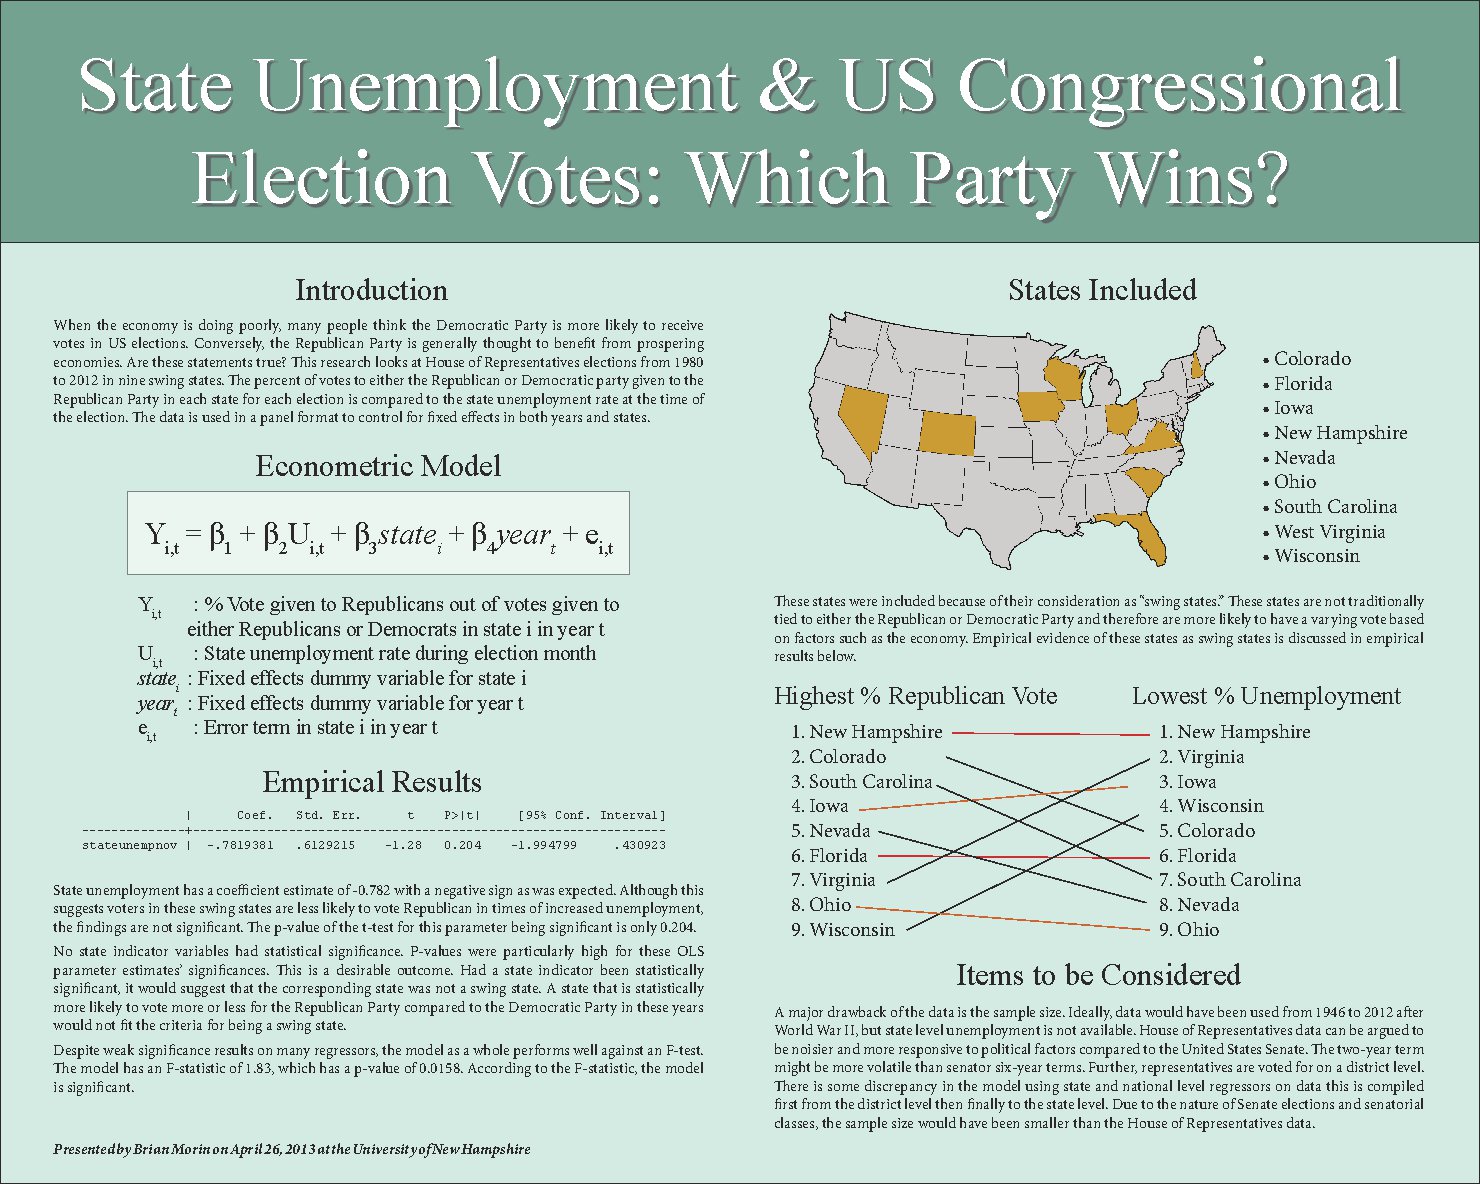 State Unemployment & Us Congressional Election Votes: Which Party Wins? by bpl33